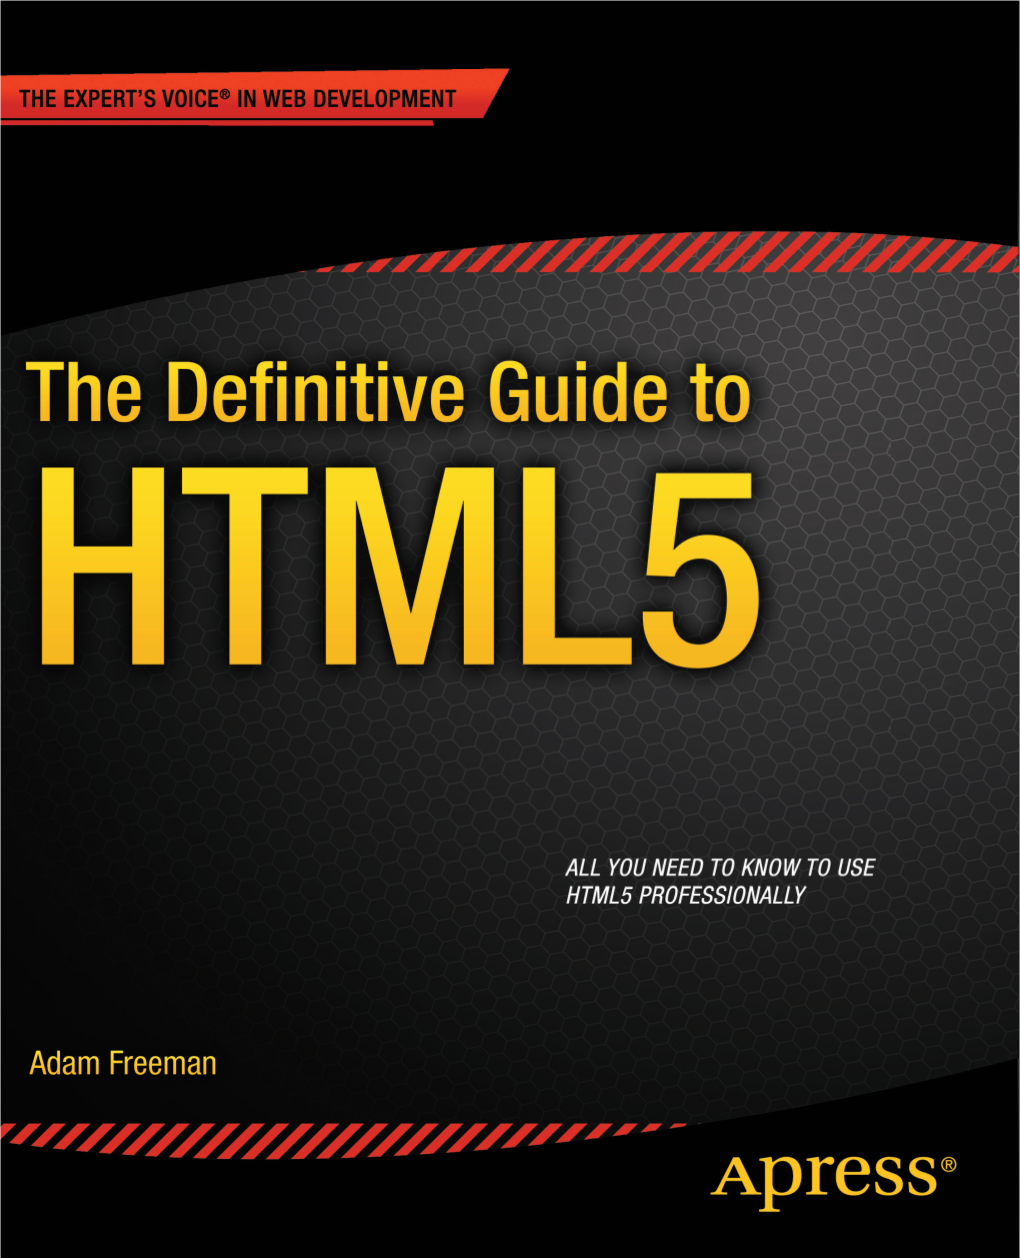 The Definitive Guide to HTML5 the Definitive Guide to HTML5 Covers Everything You Need to Create Standards- Compliant, Semantic, Modern Websites